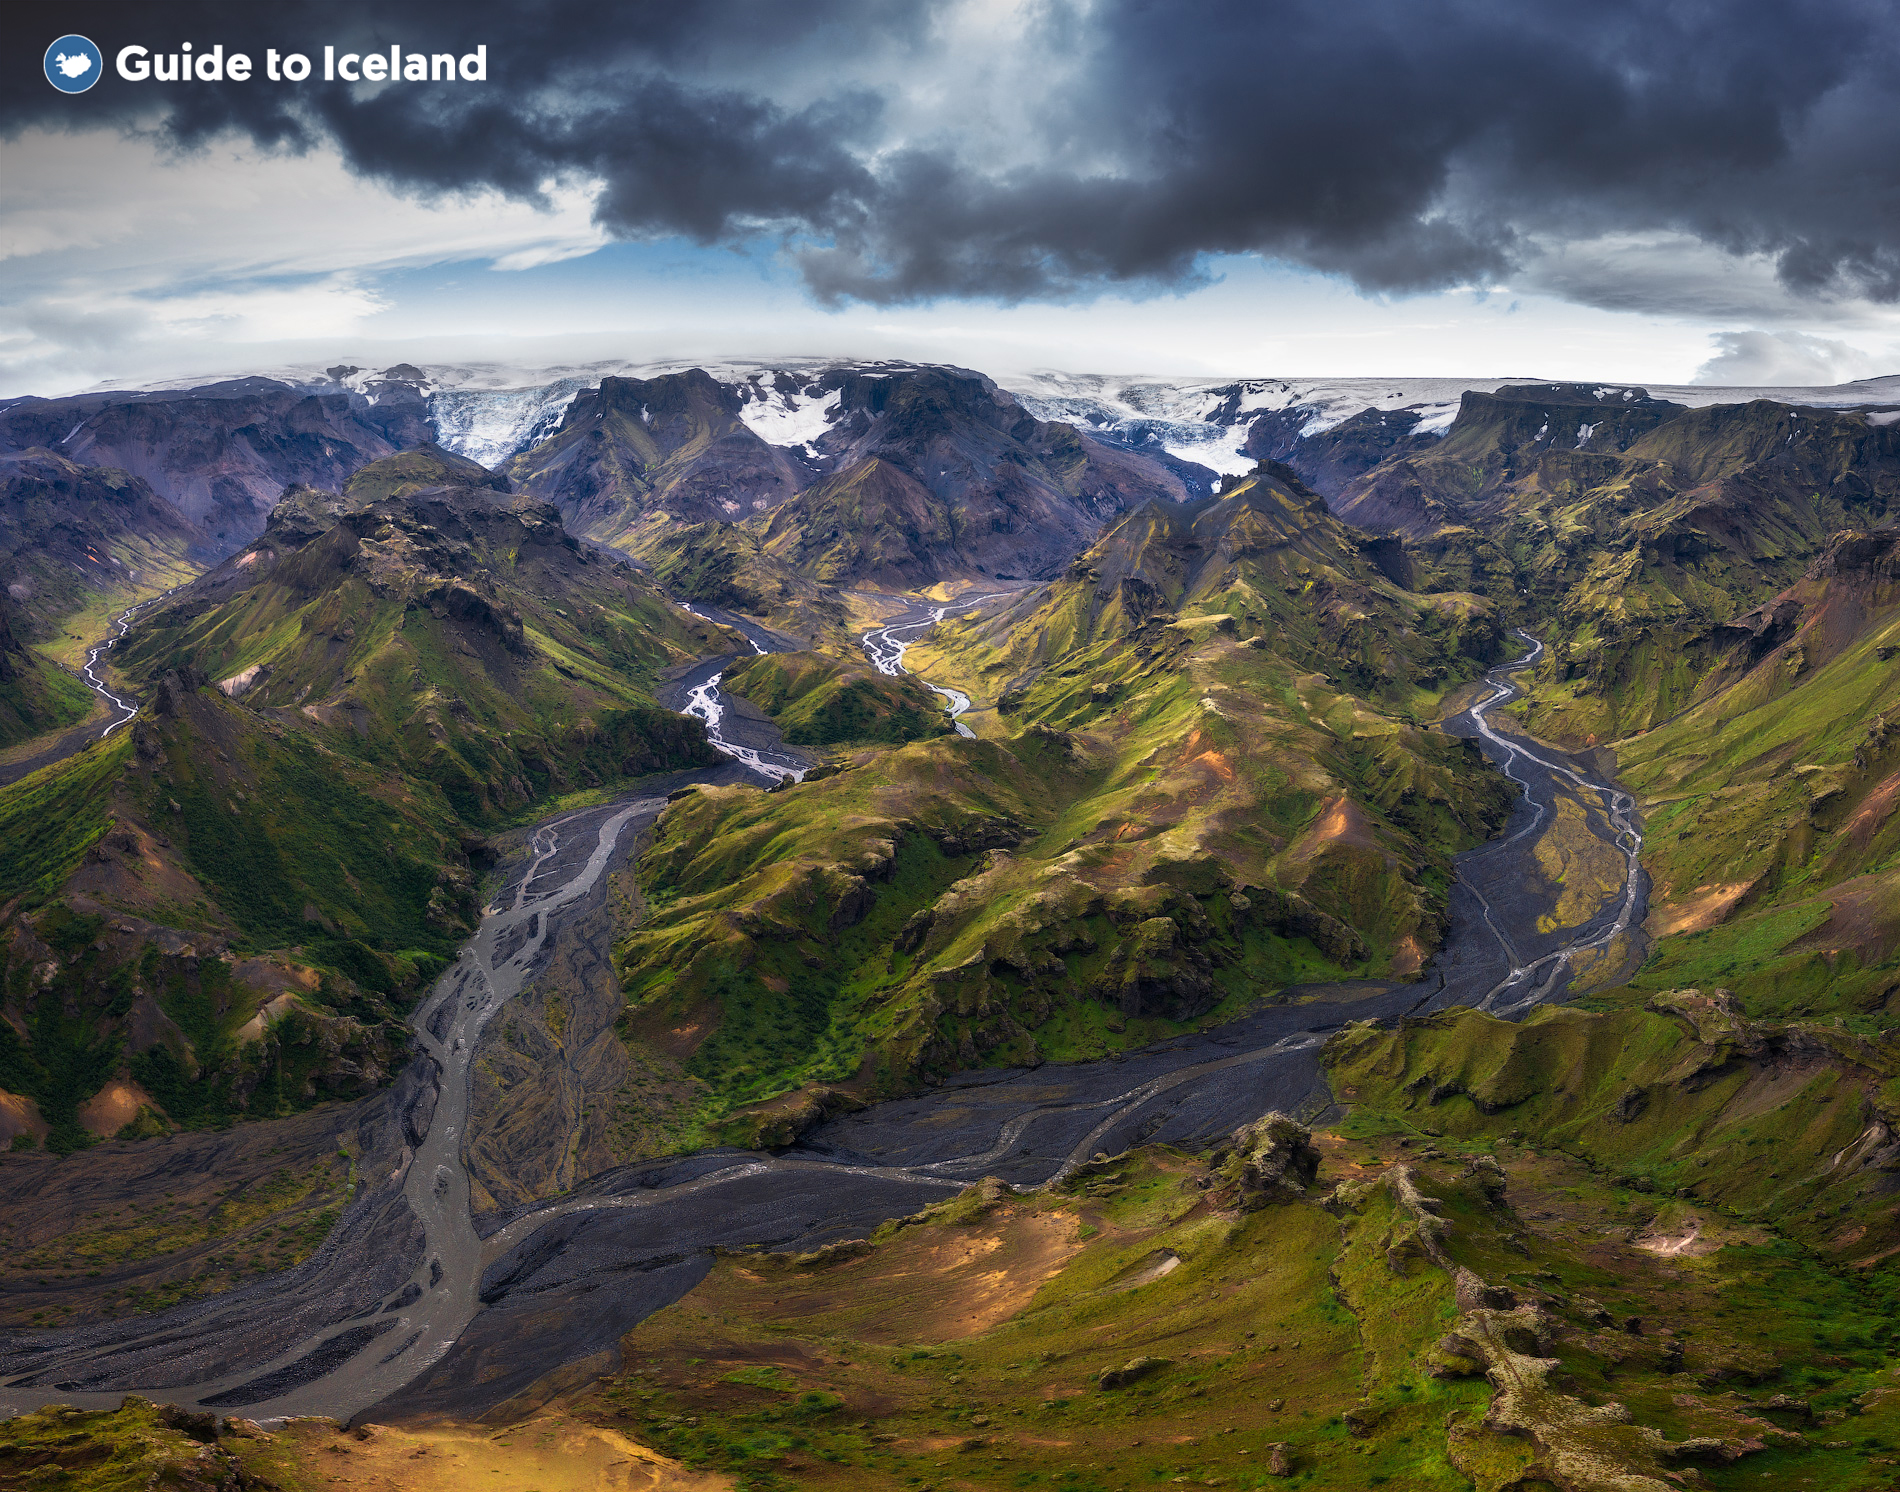 Thorsmork region is steeped in folklore and incredible mountainous forms